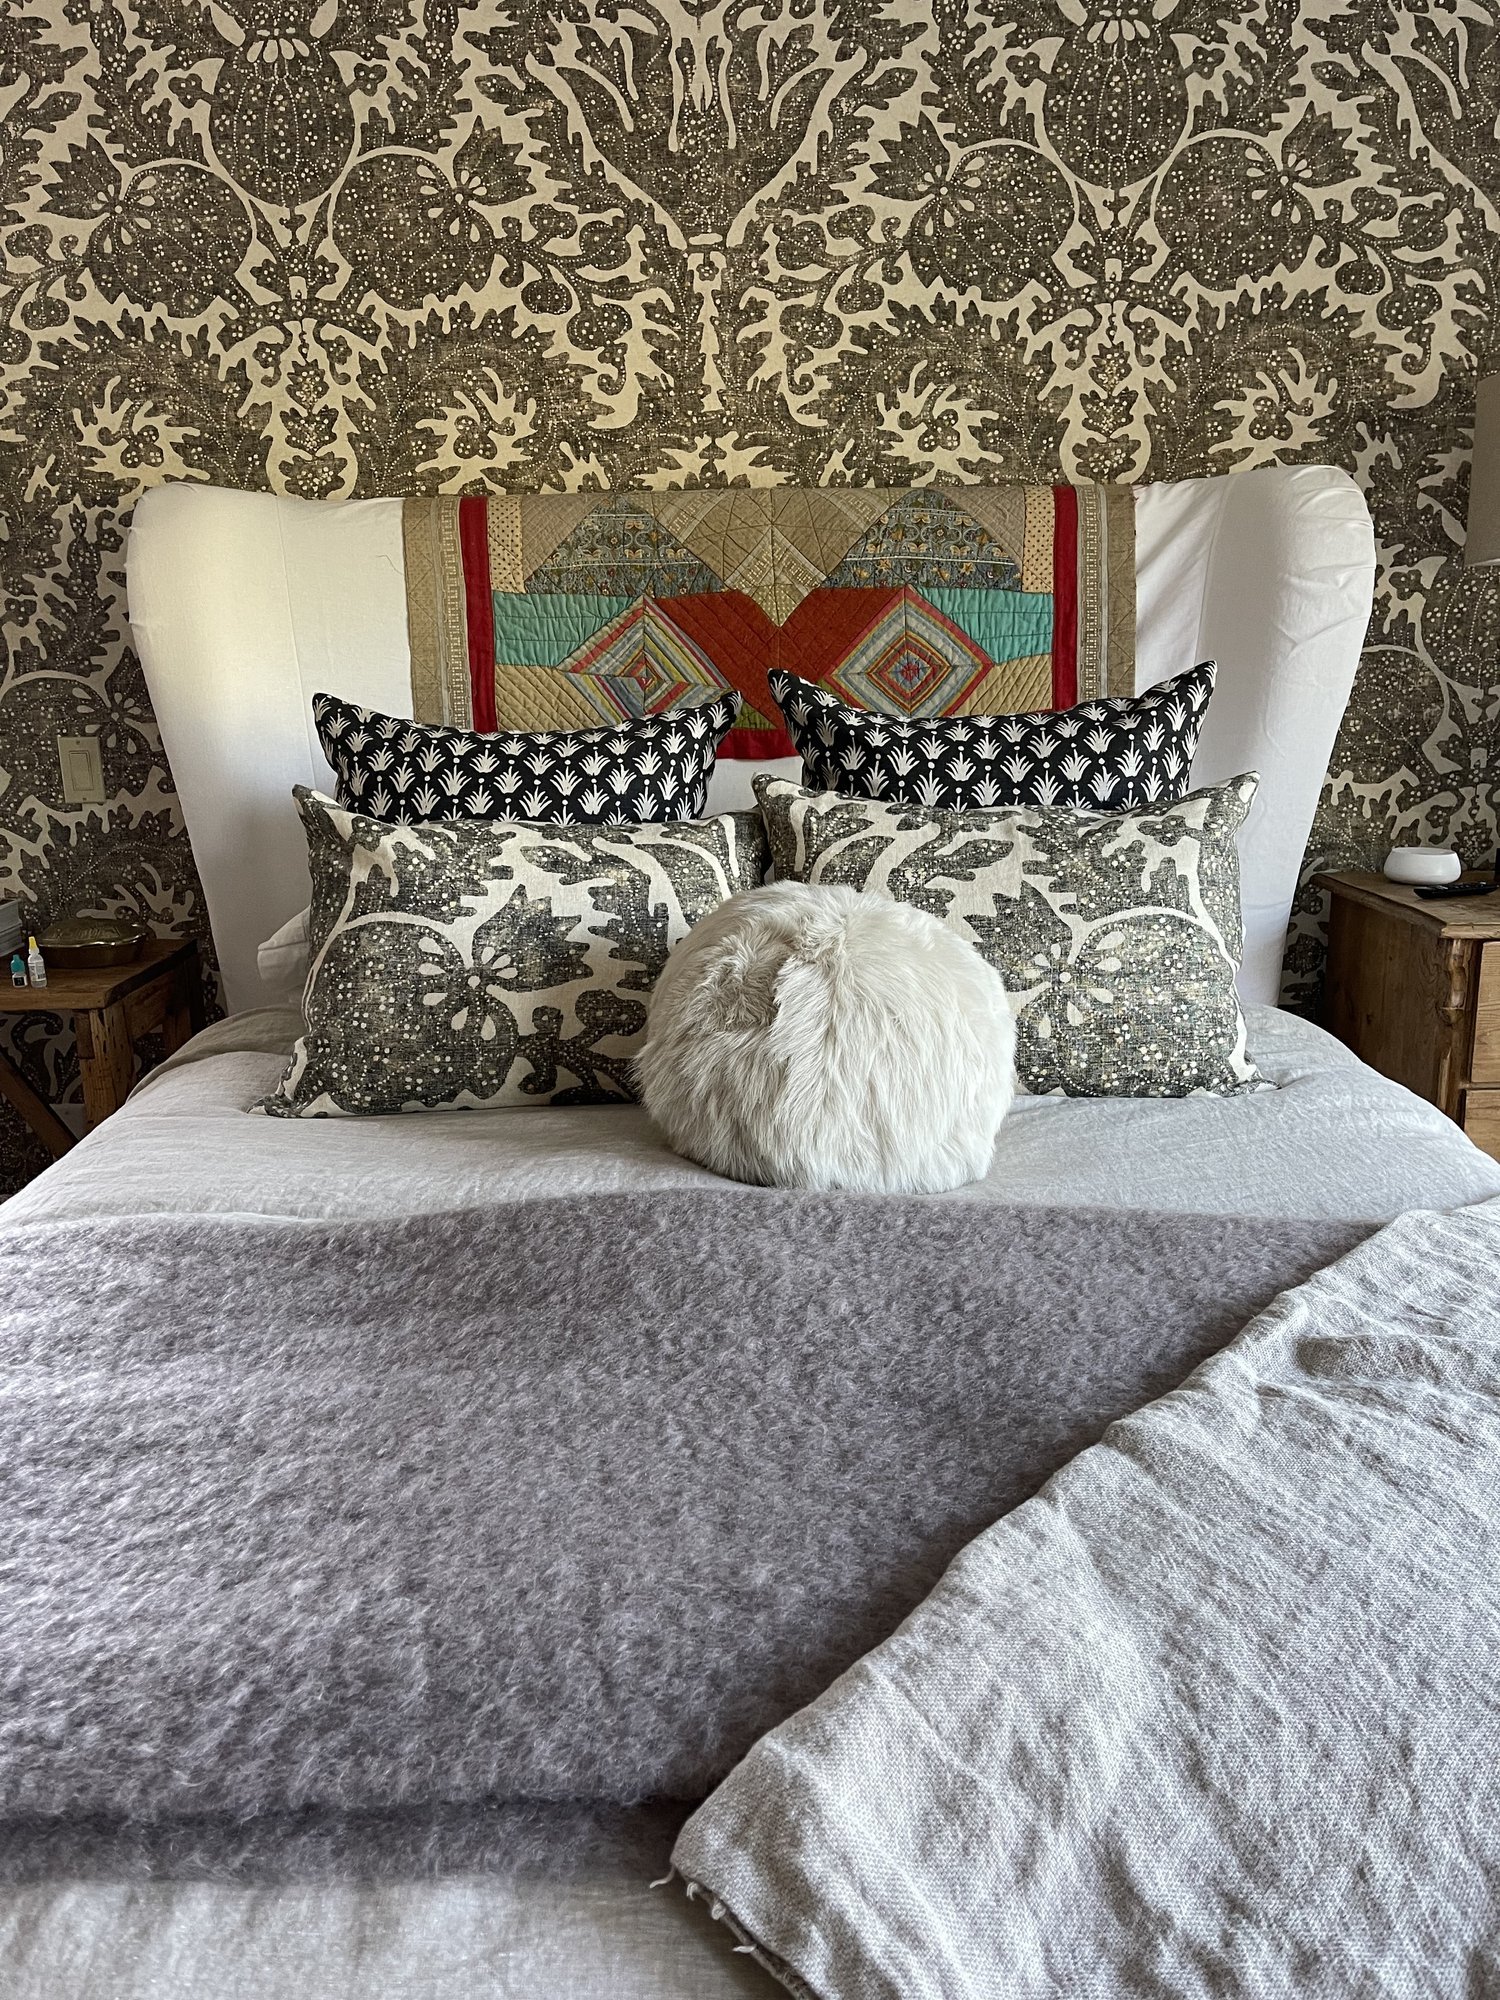  A bed with a flared white headboard with a quilt laid over it. The bed has four black and white patterned pillows and one fluffy round white one arranged neatly. The wall behind the bed is wallpapered in large print green abstract florals.  